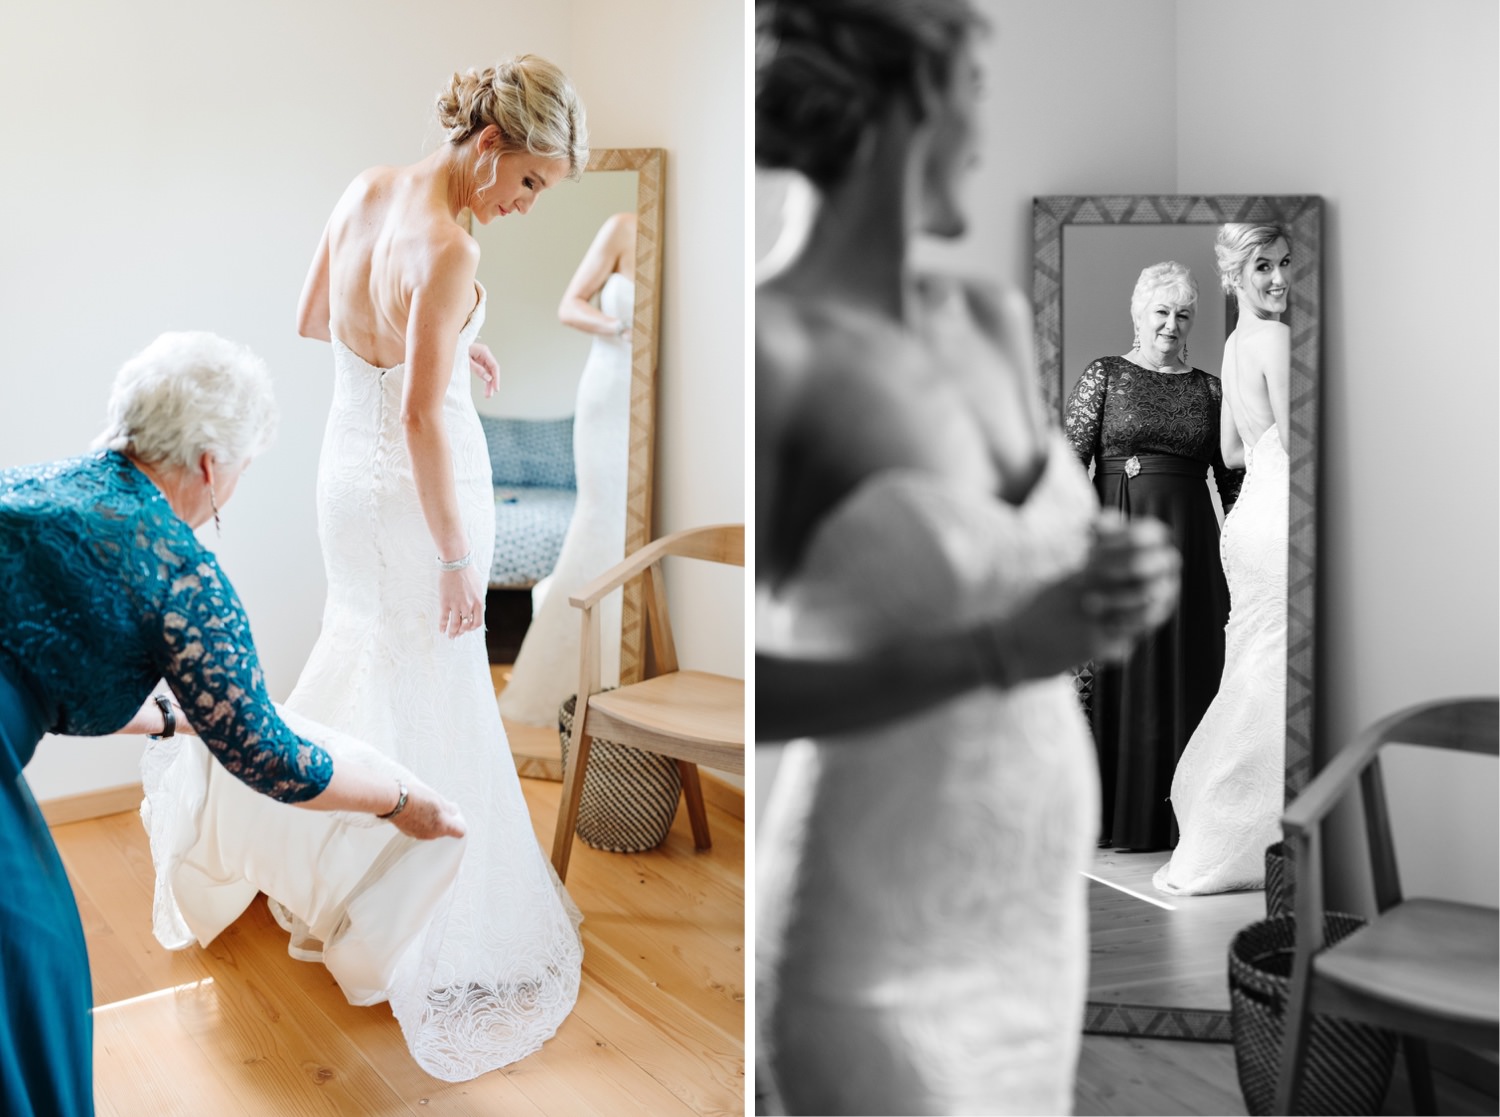 mother of the bride helping bride into dress on wedding day